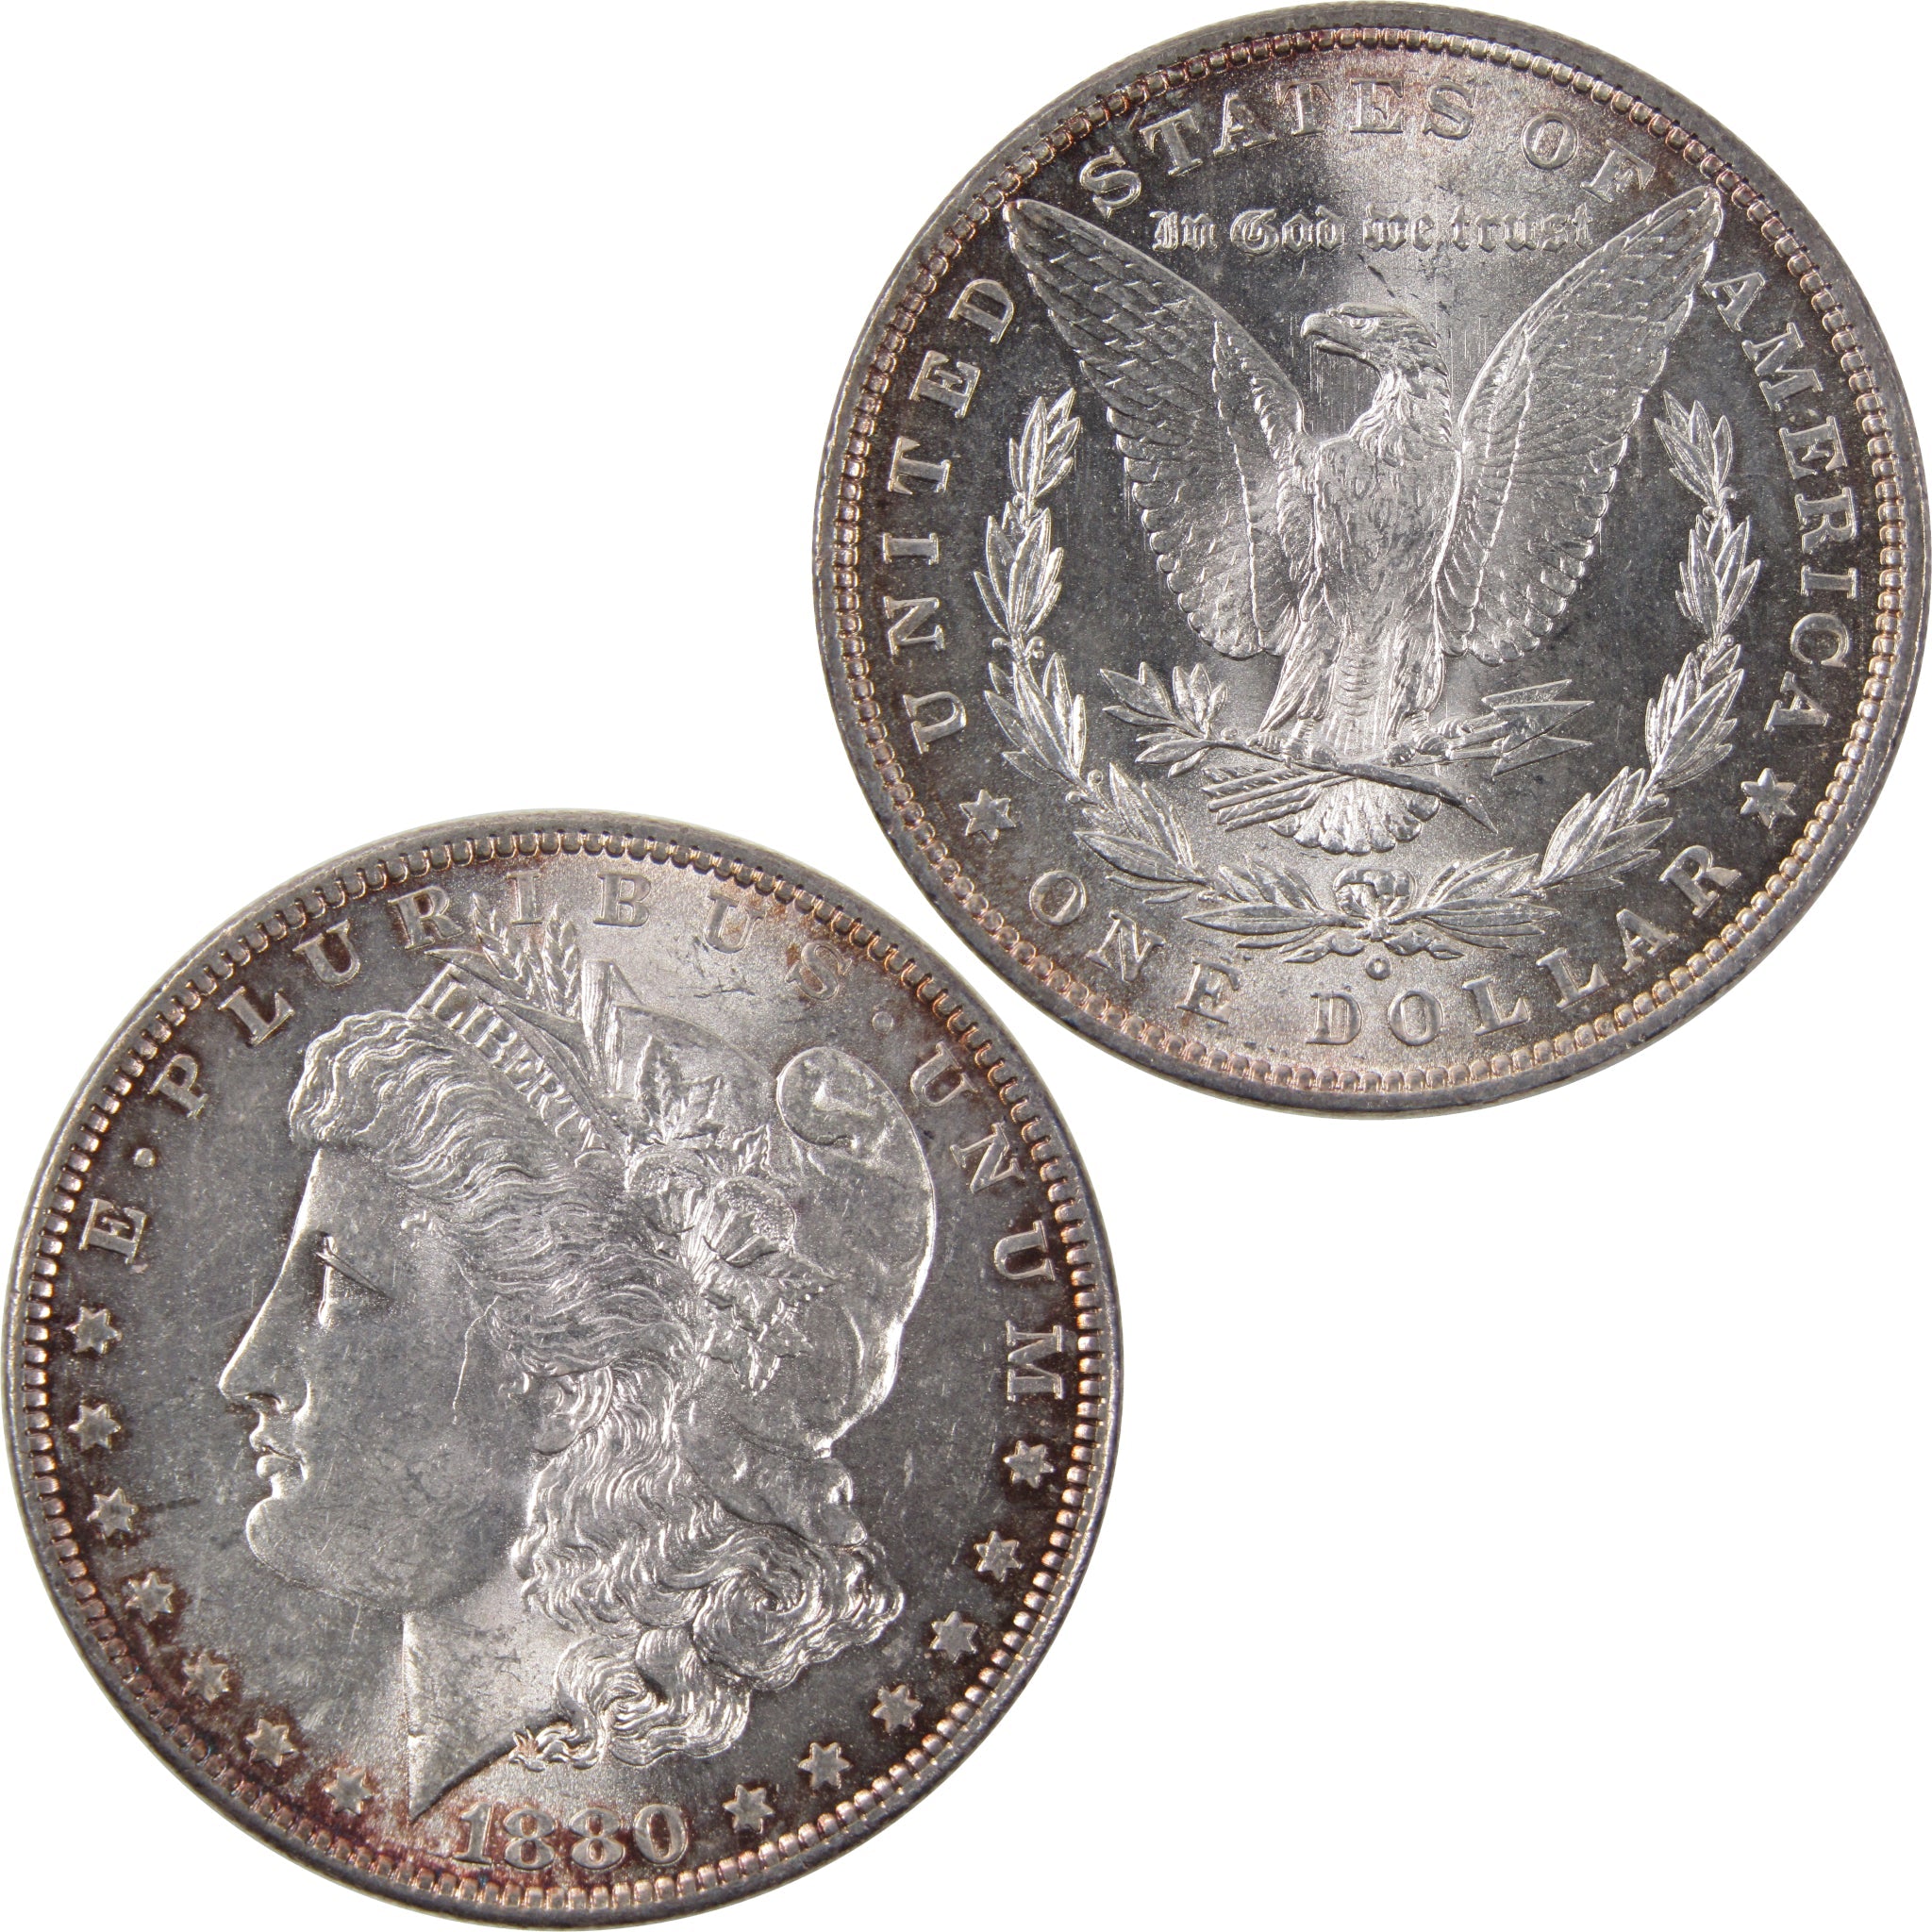 1880 O Morgan Dollar BU Uncirculated Mint State 90% Silver SKU:I2496 - Morgan coin - Morgan silver dollar - Morgan silver dollar for sale - Profile Coins &amp; Collectibles